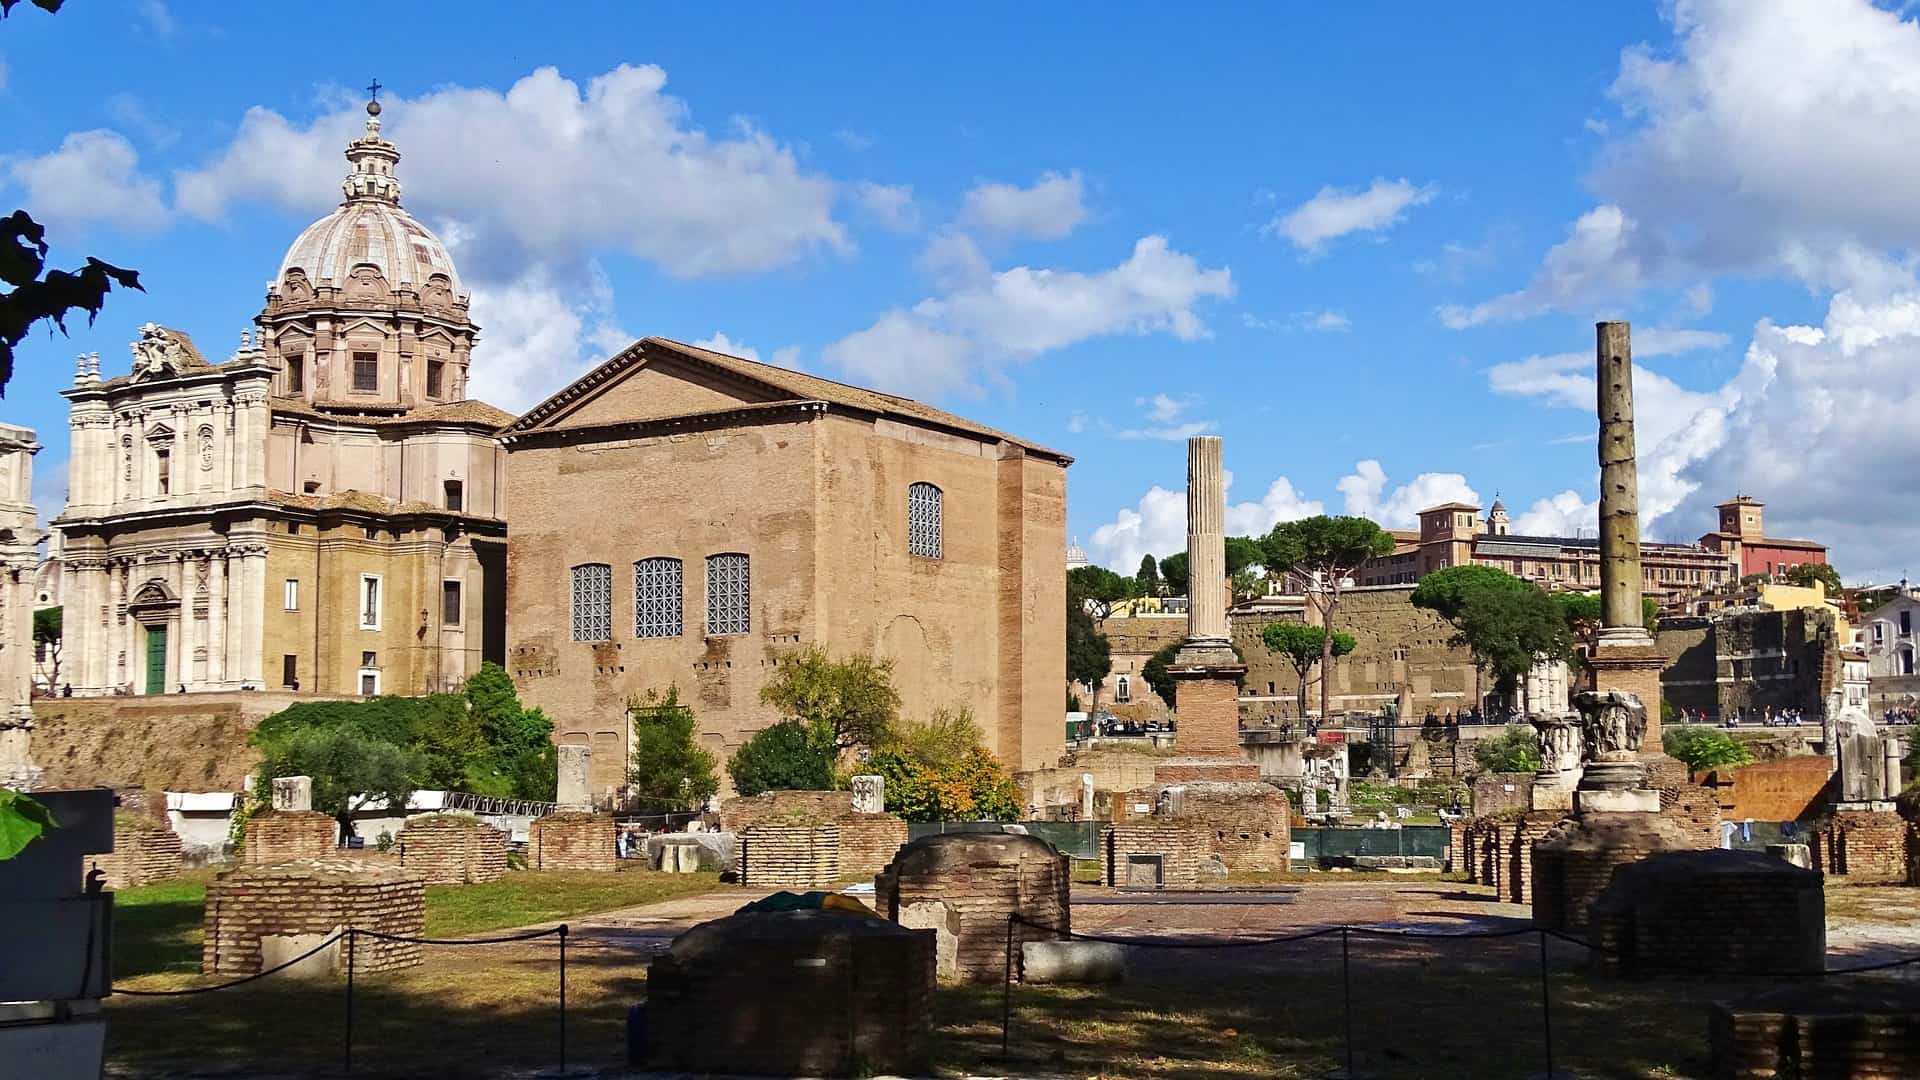 Shot of the Curia Julia building at the Roman Forum